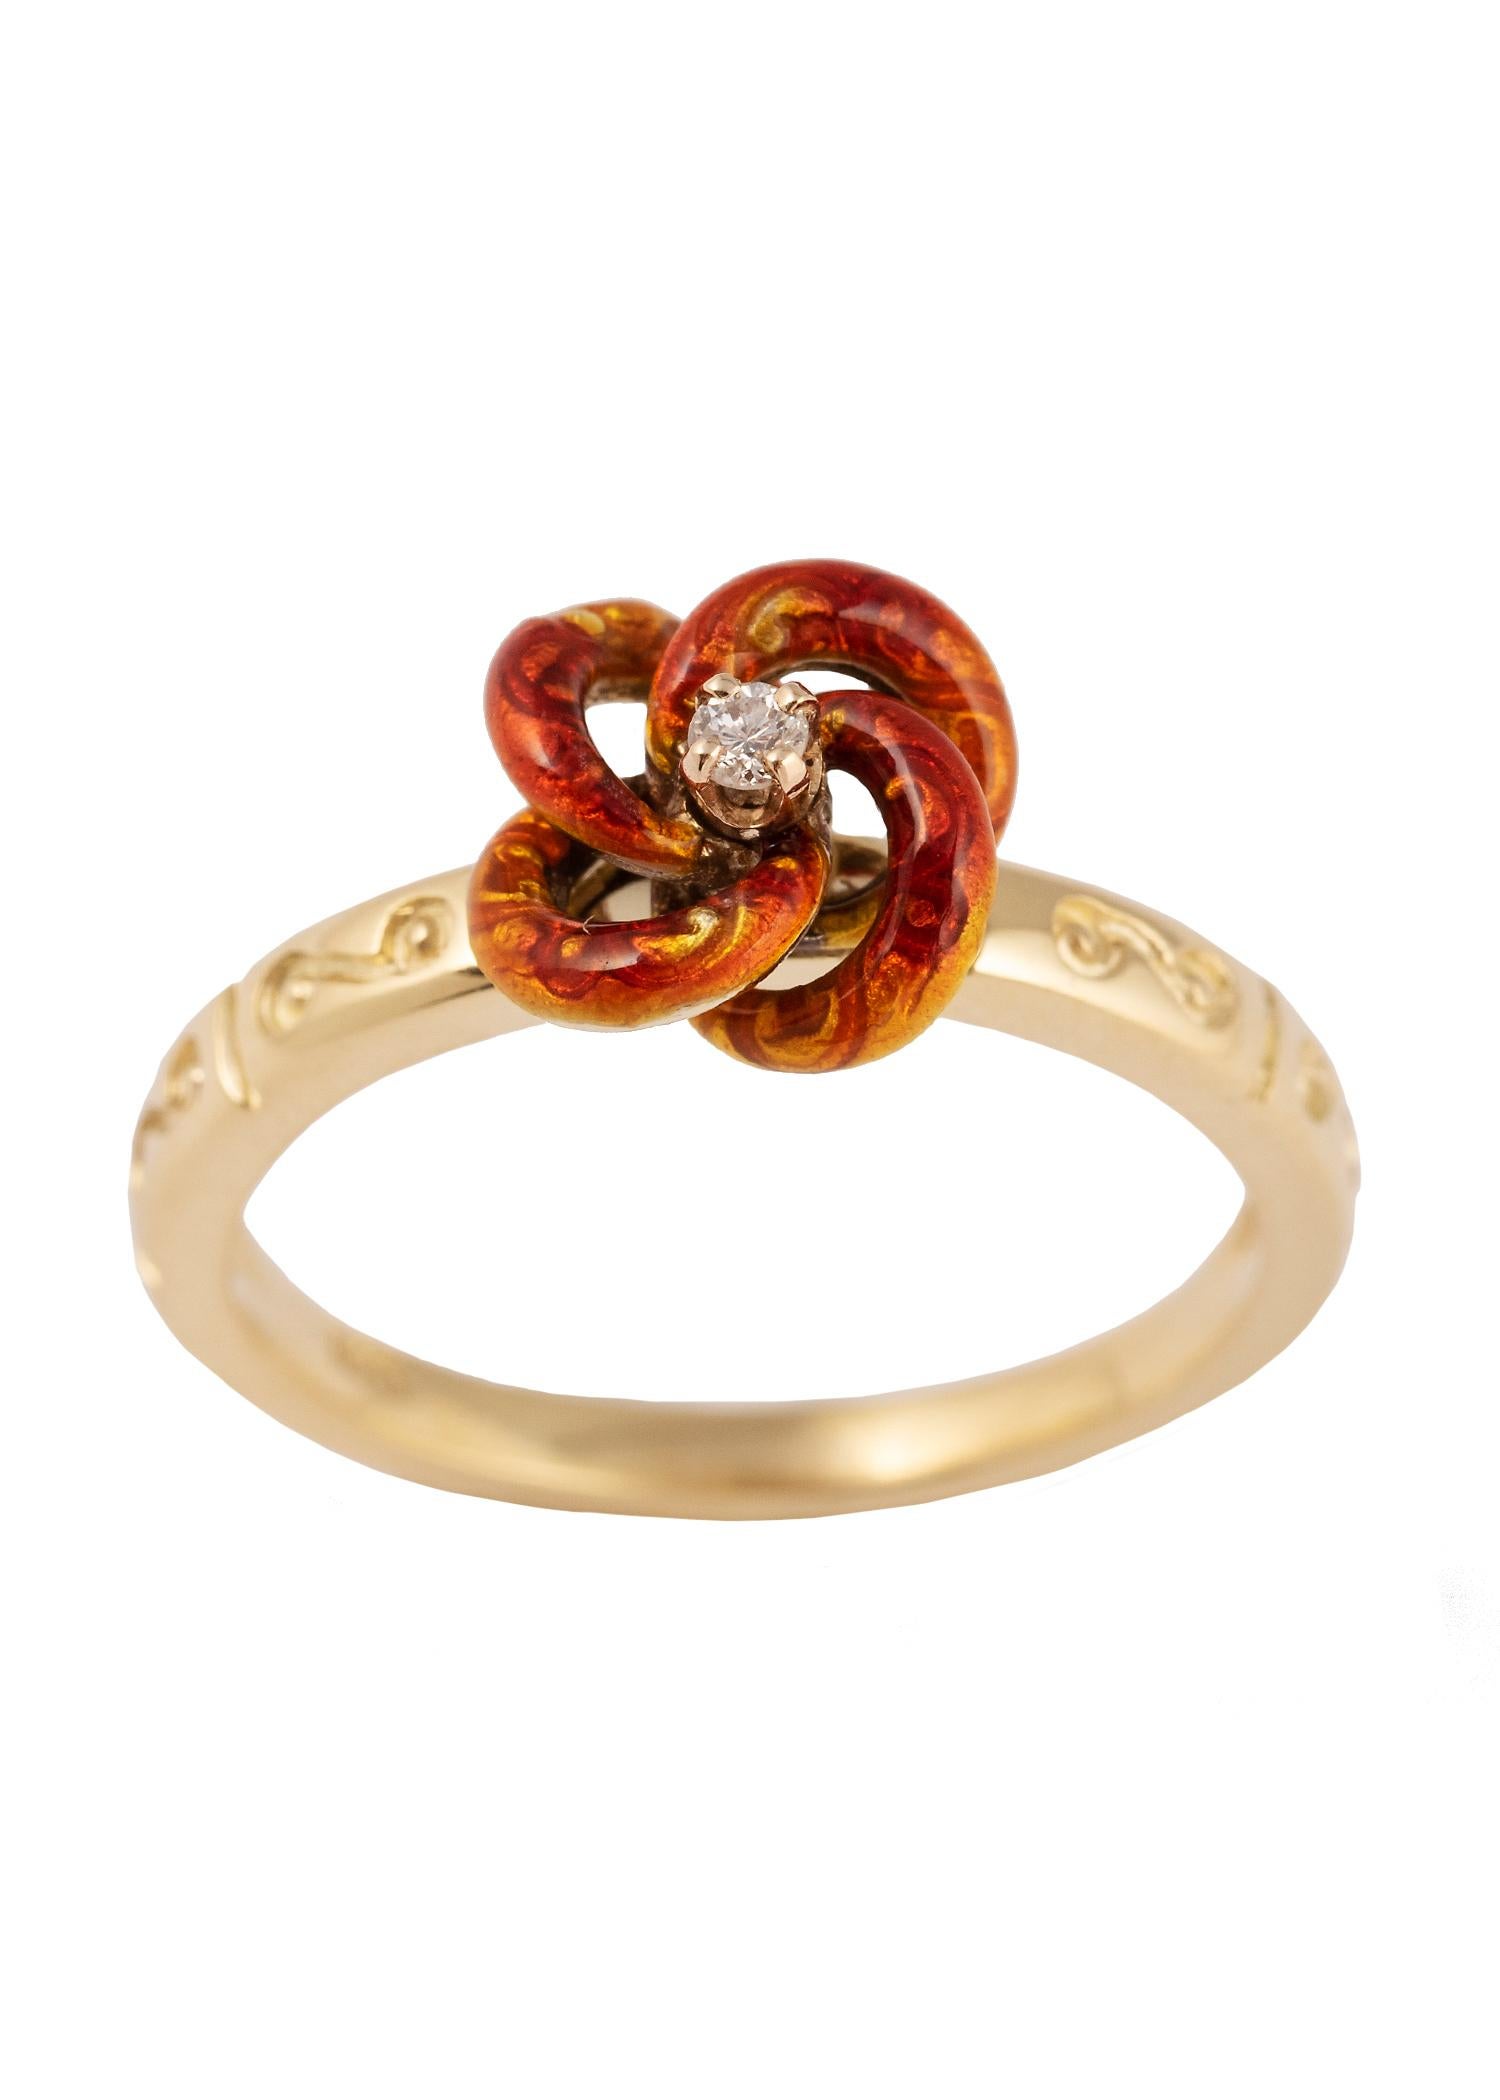 A 19th century translucent red and yellow enamel knot on a repoussé ground, set with a bright diamond, mounted on an 18k gold ring, the shank decorated with swirl motifs. 

Knot 3/8 in. (1 cm) diam; ¼ in. (.6 cm) high.

Size 7 ½. 
